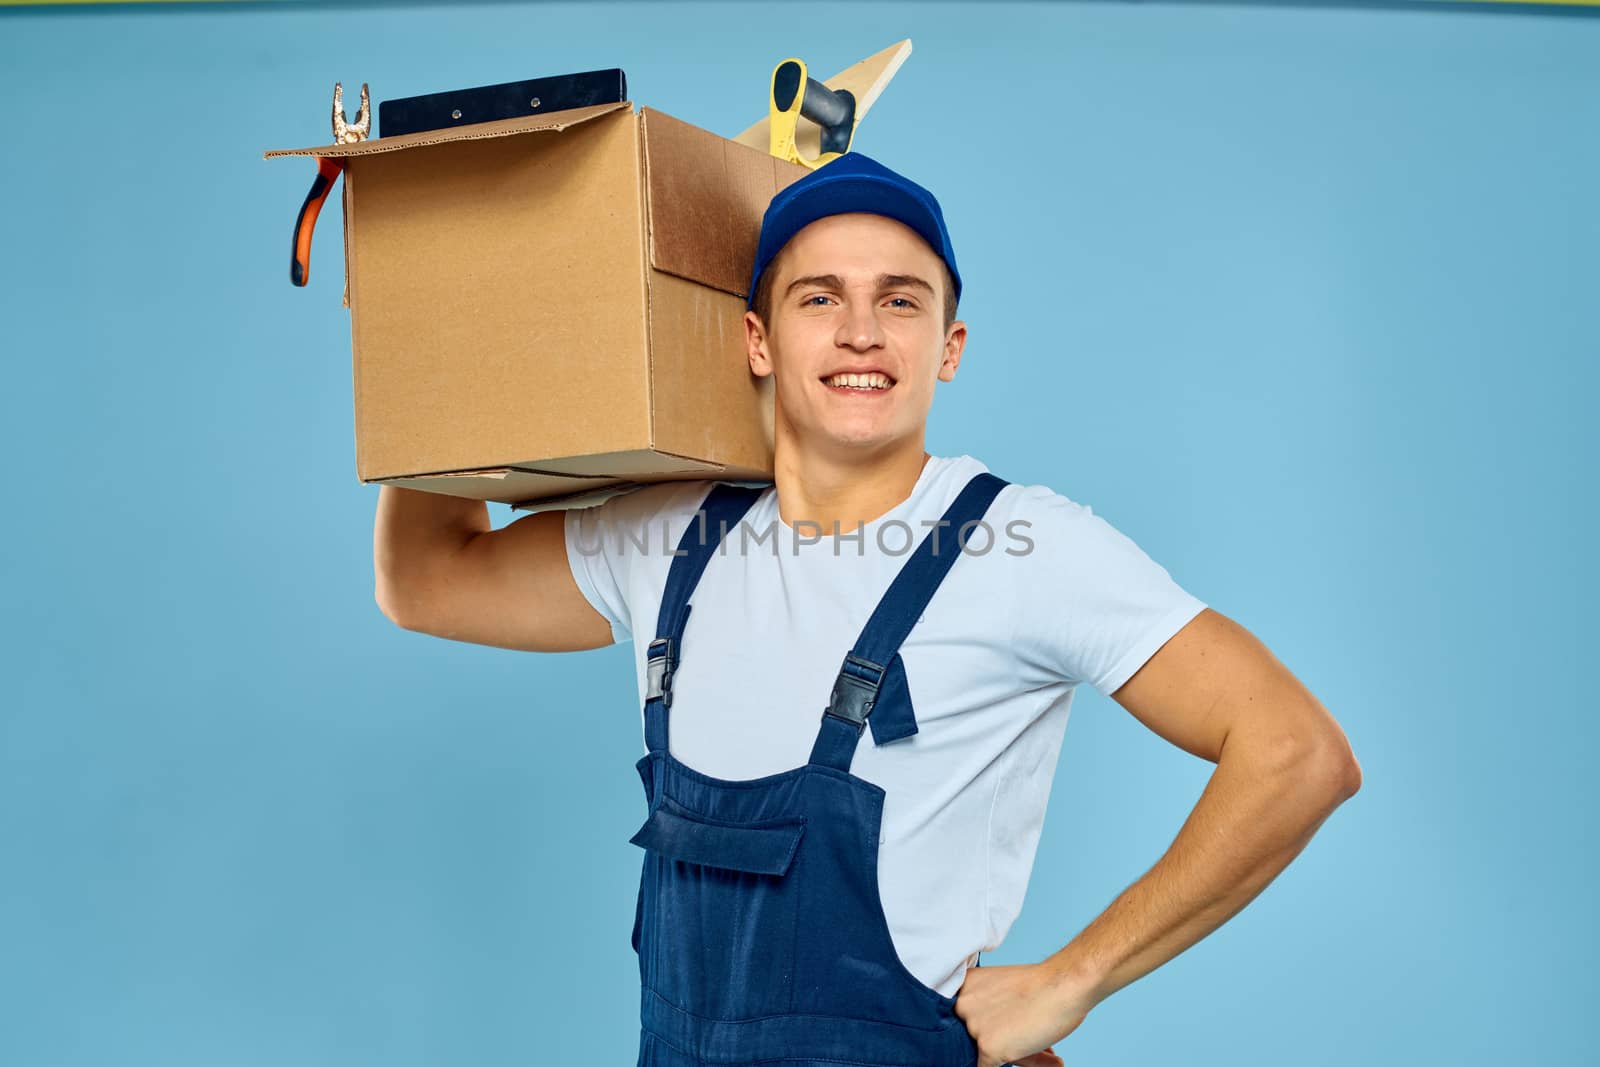 working man in uniform box with tools loader delivery blue background by SHOTPRIME